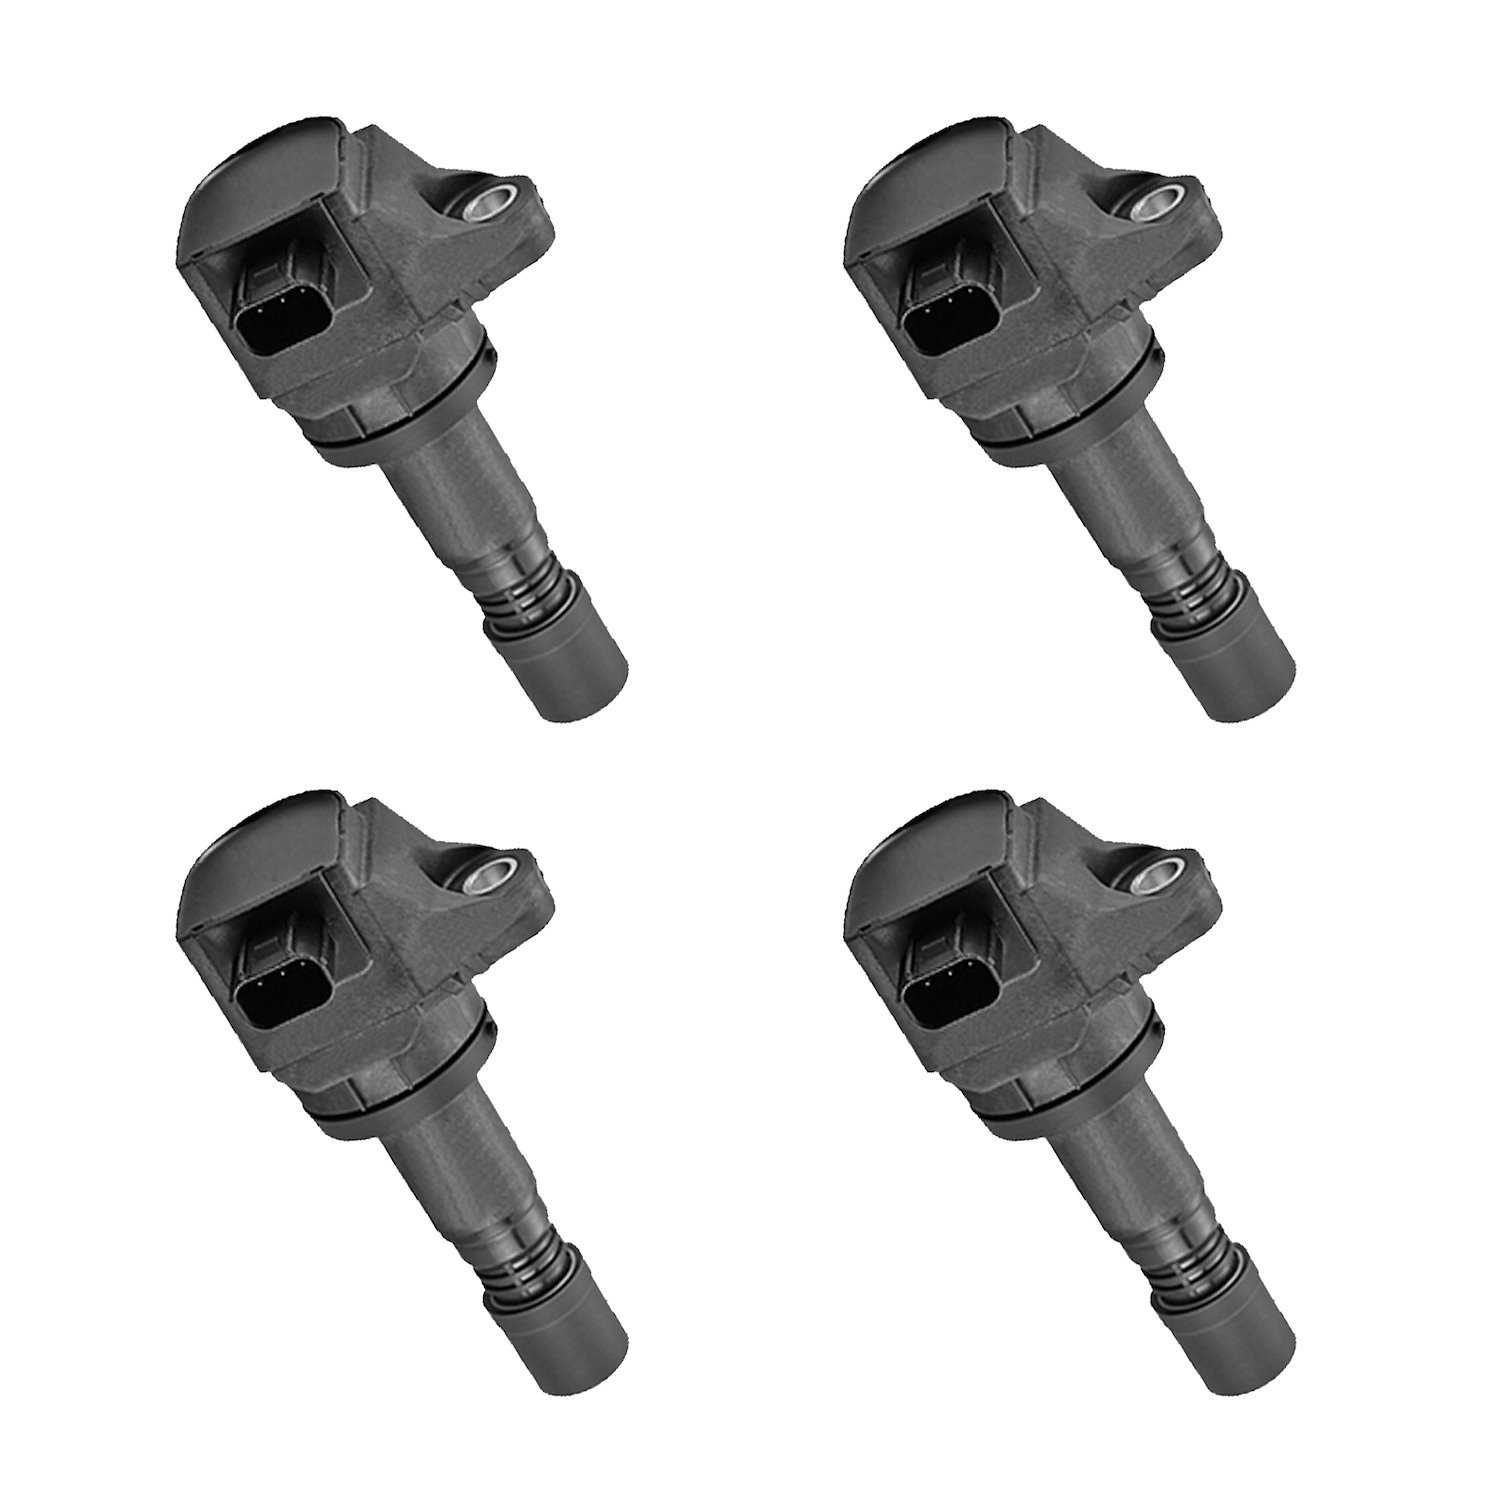 OE Replacement Ignition Coils for 2012-2014 Honda Civic L4 1.8L